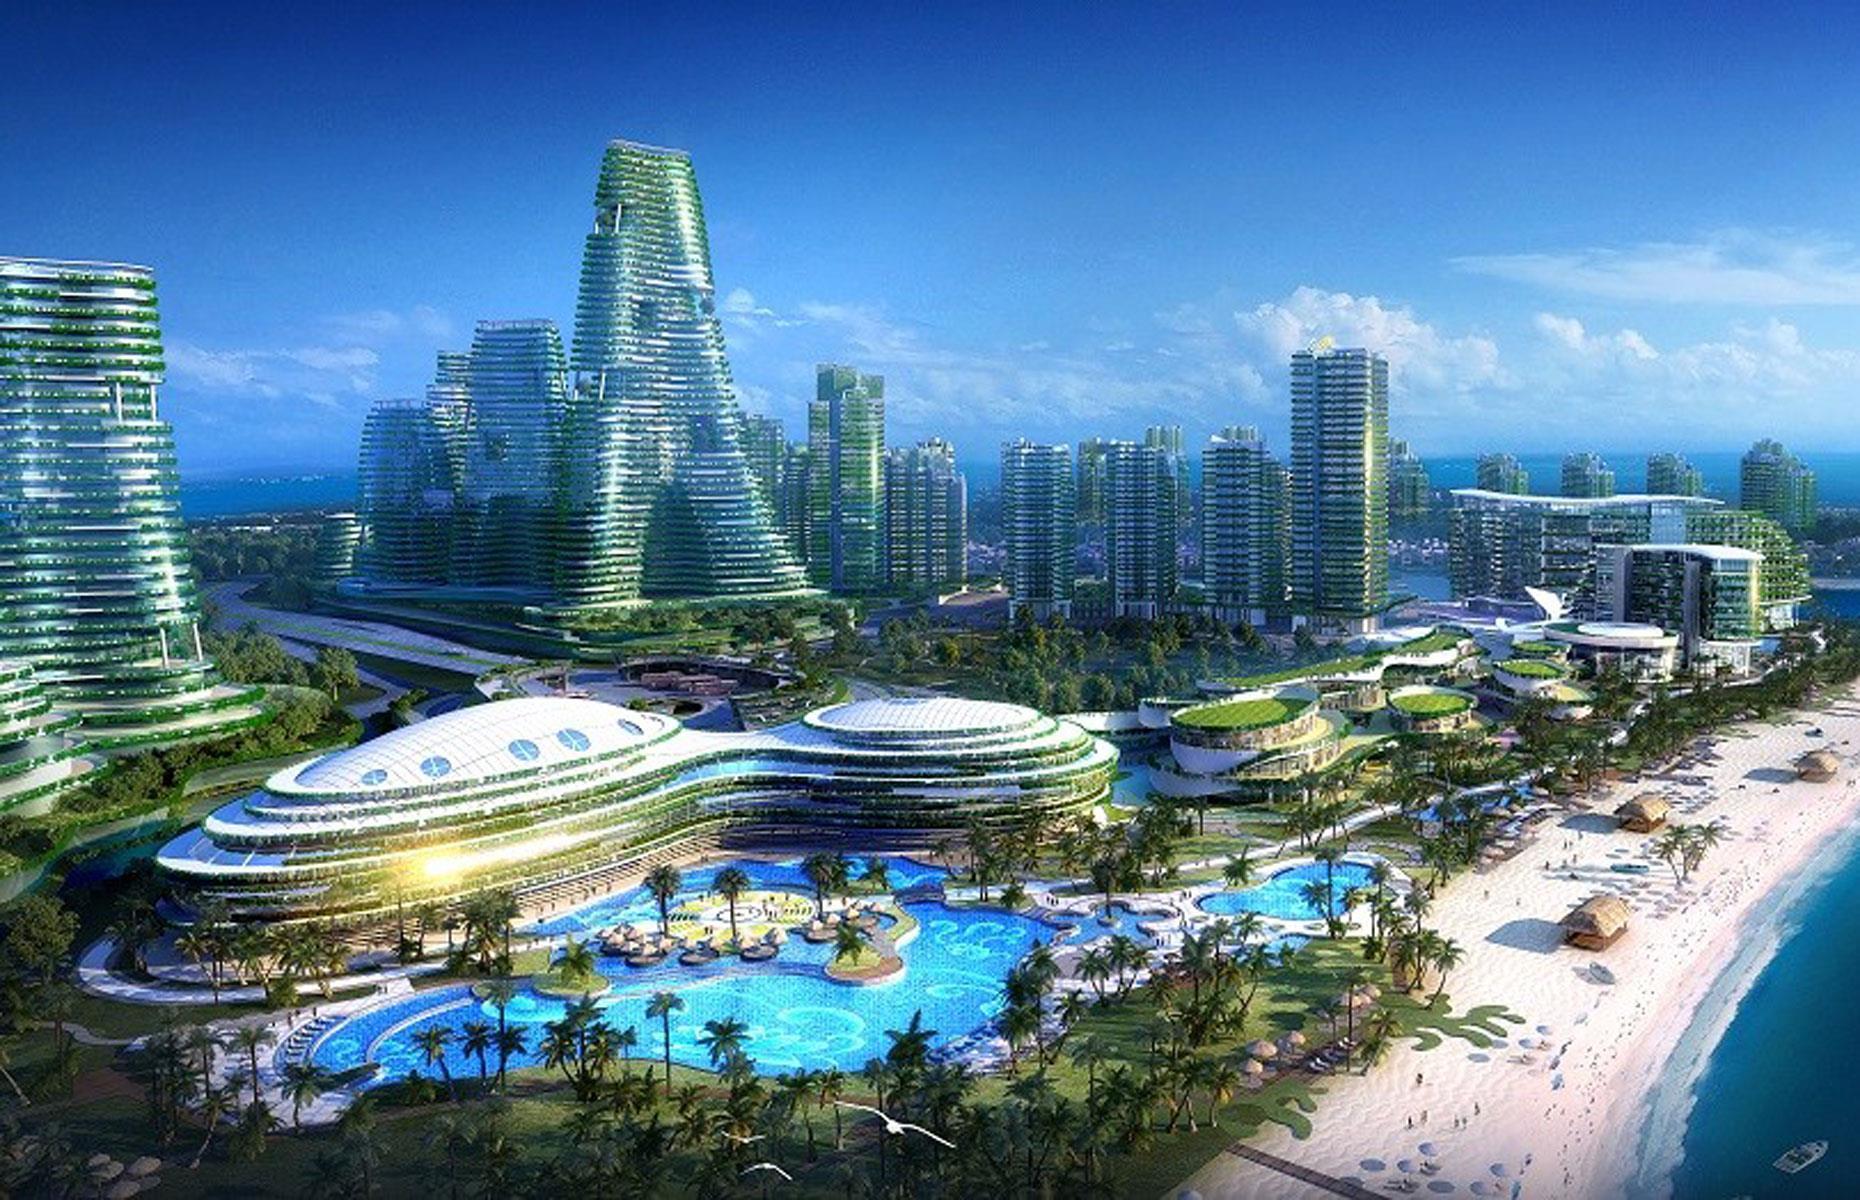 The world's most expensive megaprojects currently under construction